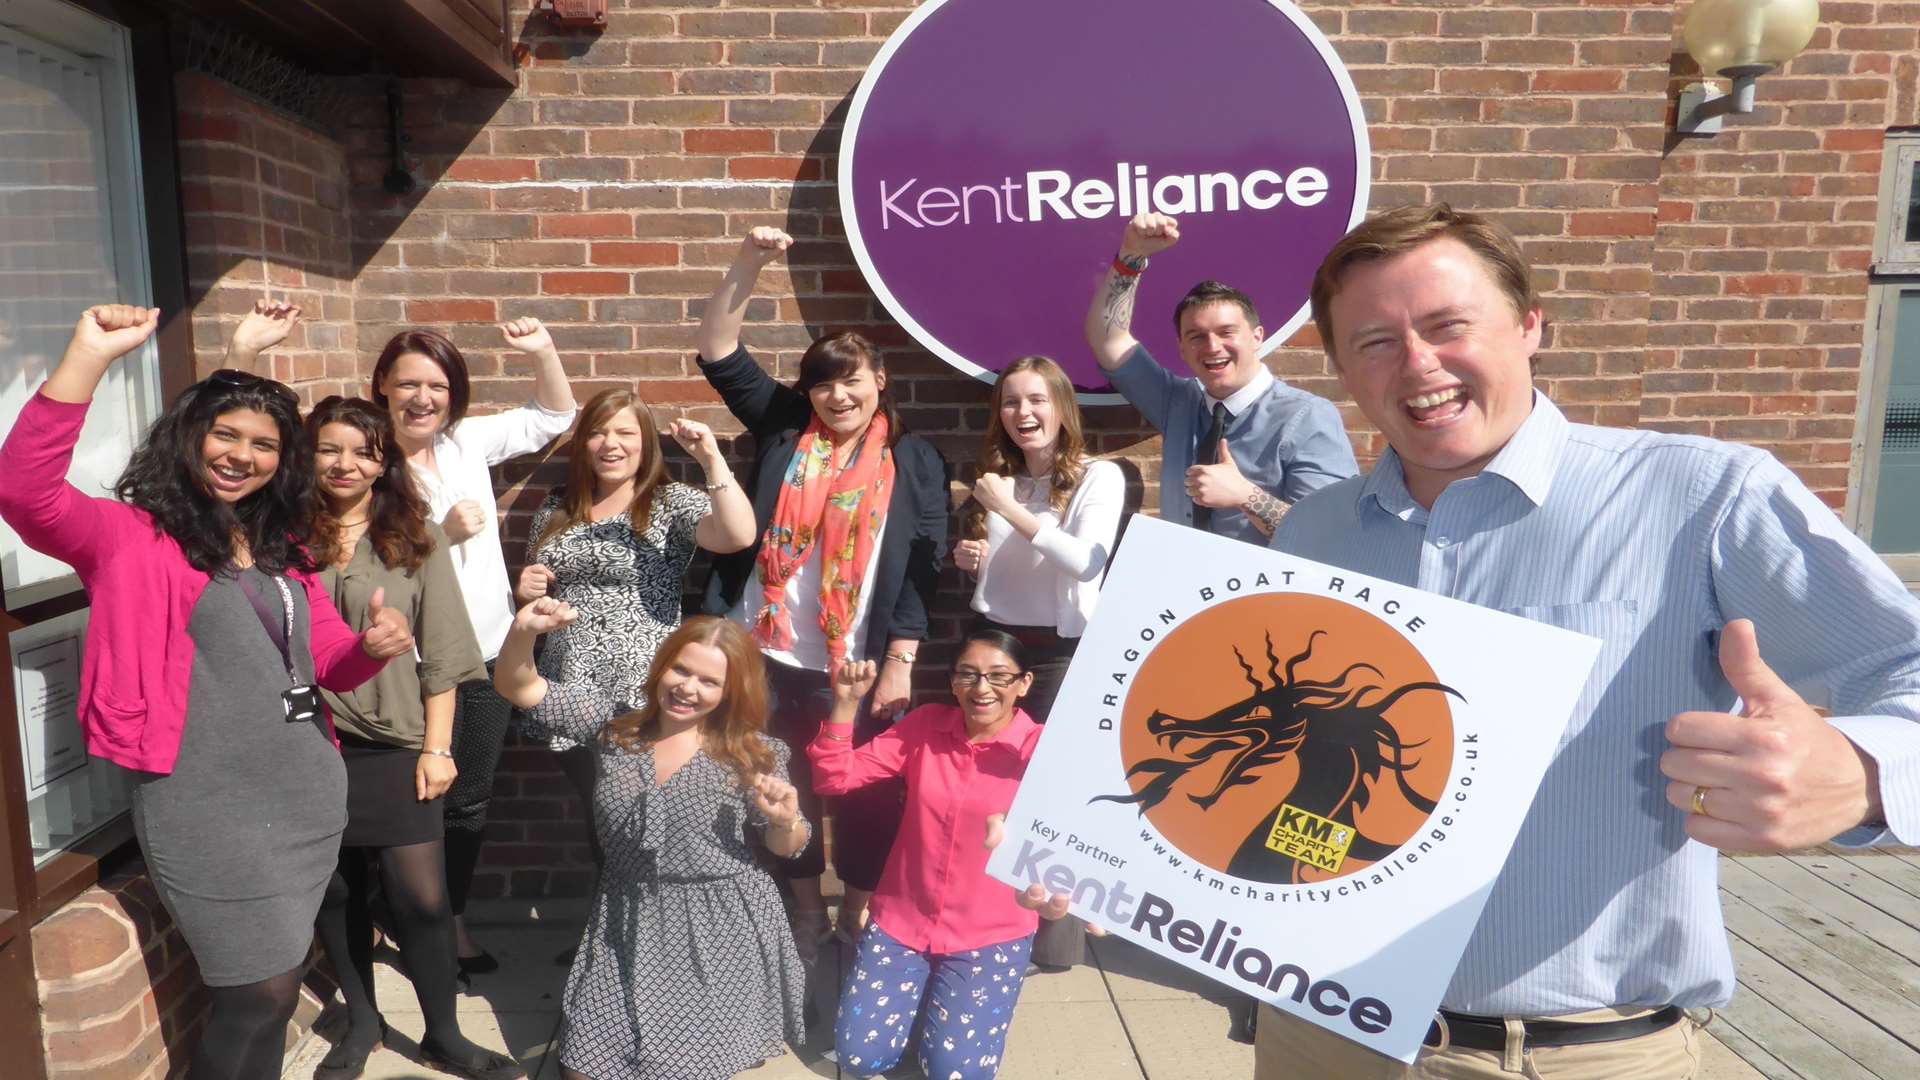 Robert Gurr and the Kent Reliance dragon boat team announce the organisation is to be the headline sponsor of the annual KM Dragon Boat Race.